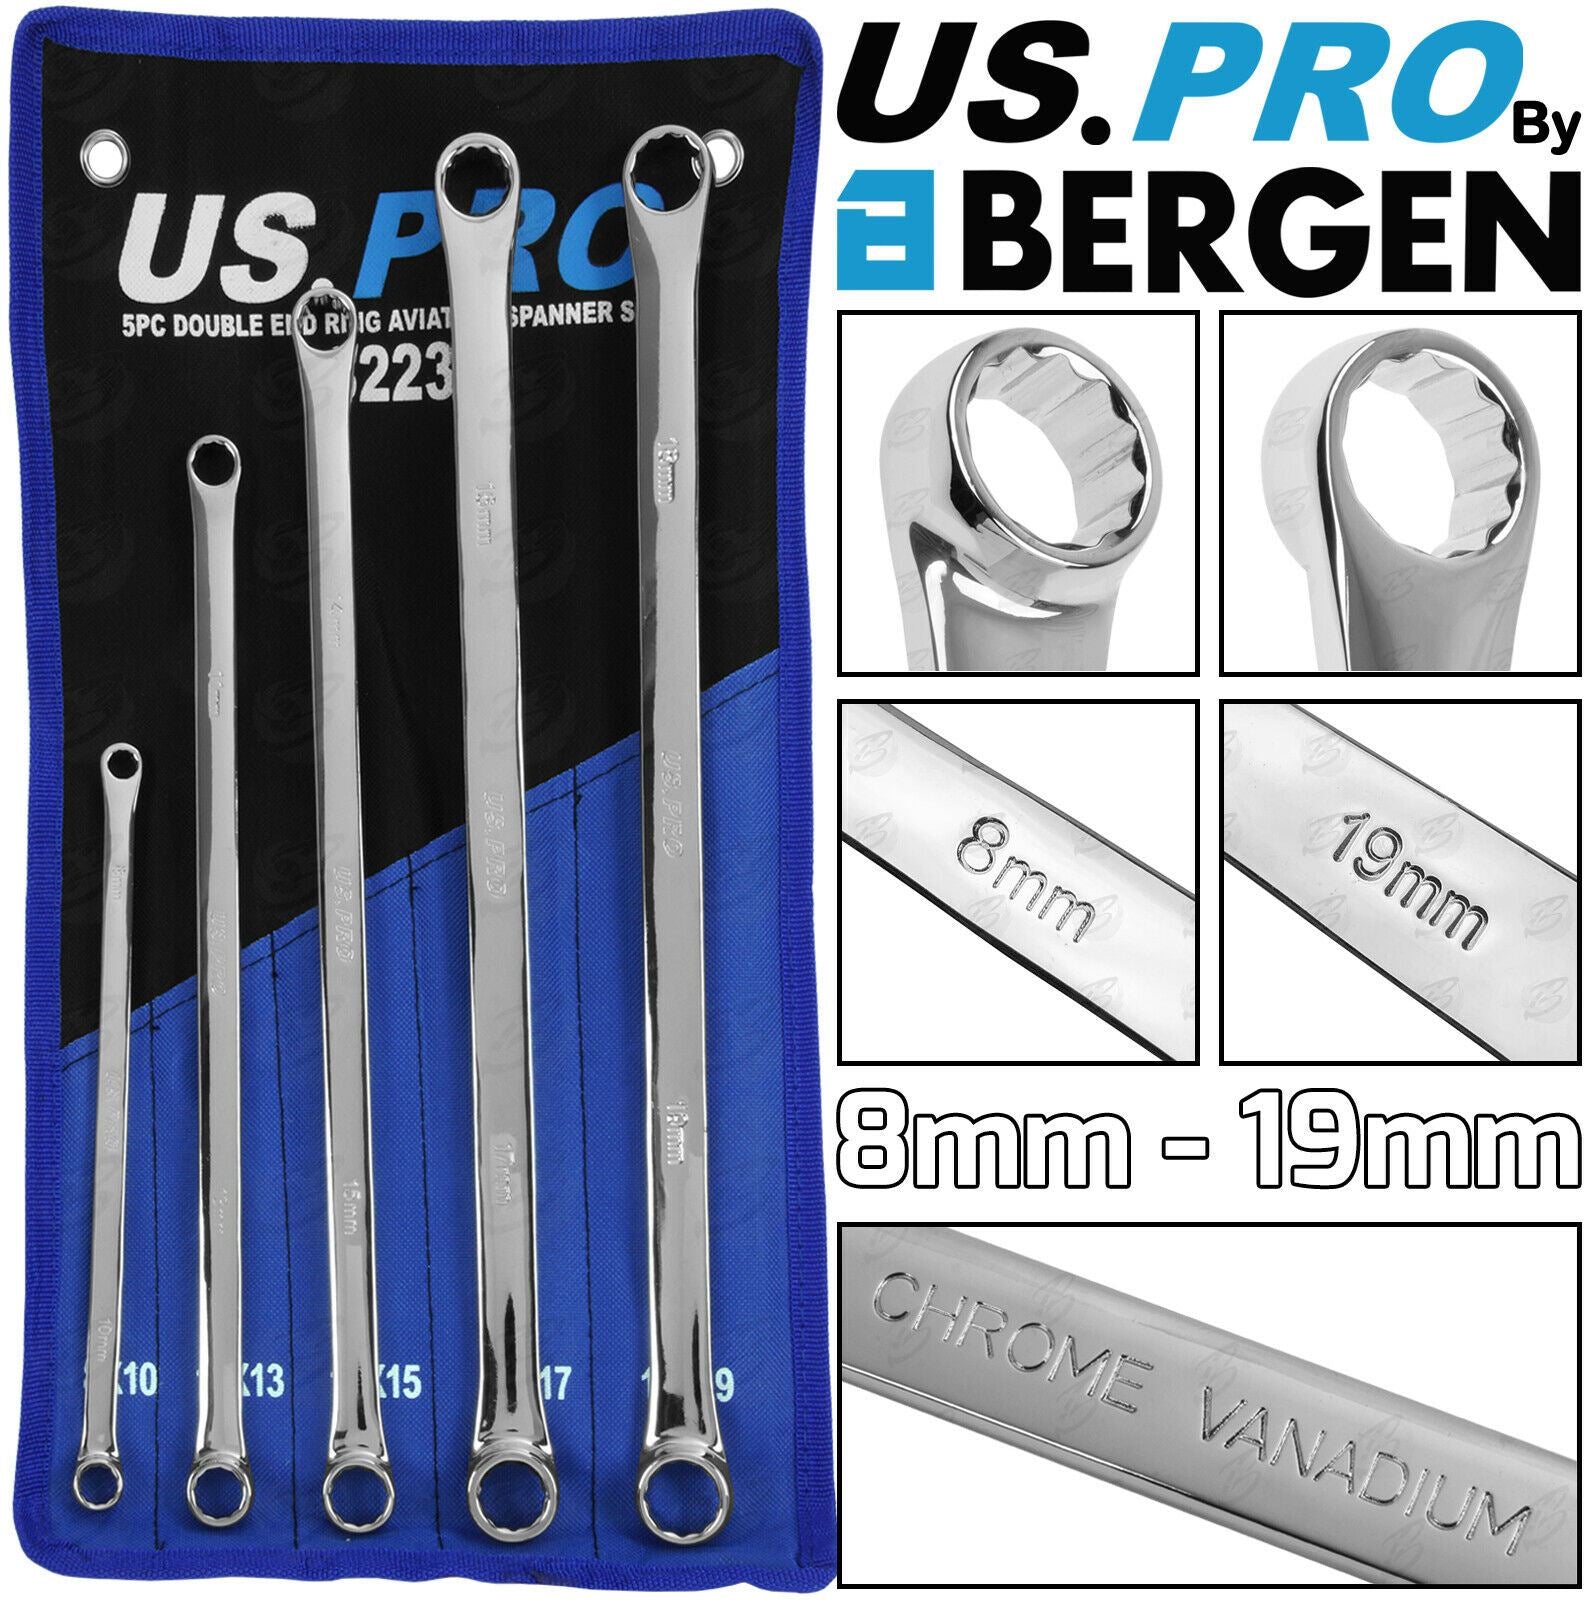 US PRO 5PCS EXTRA LONG AVIATION SPANNERS 8MM - 19MM